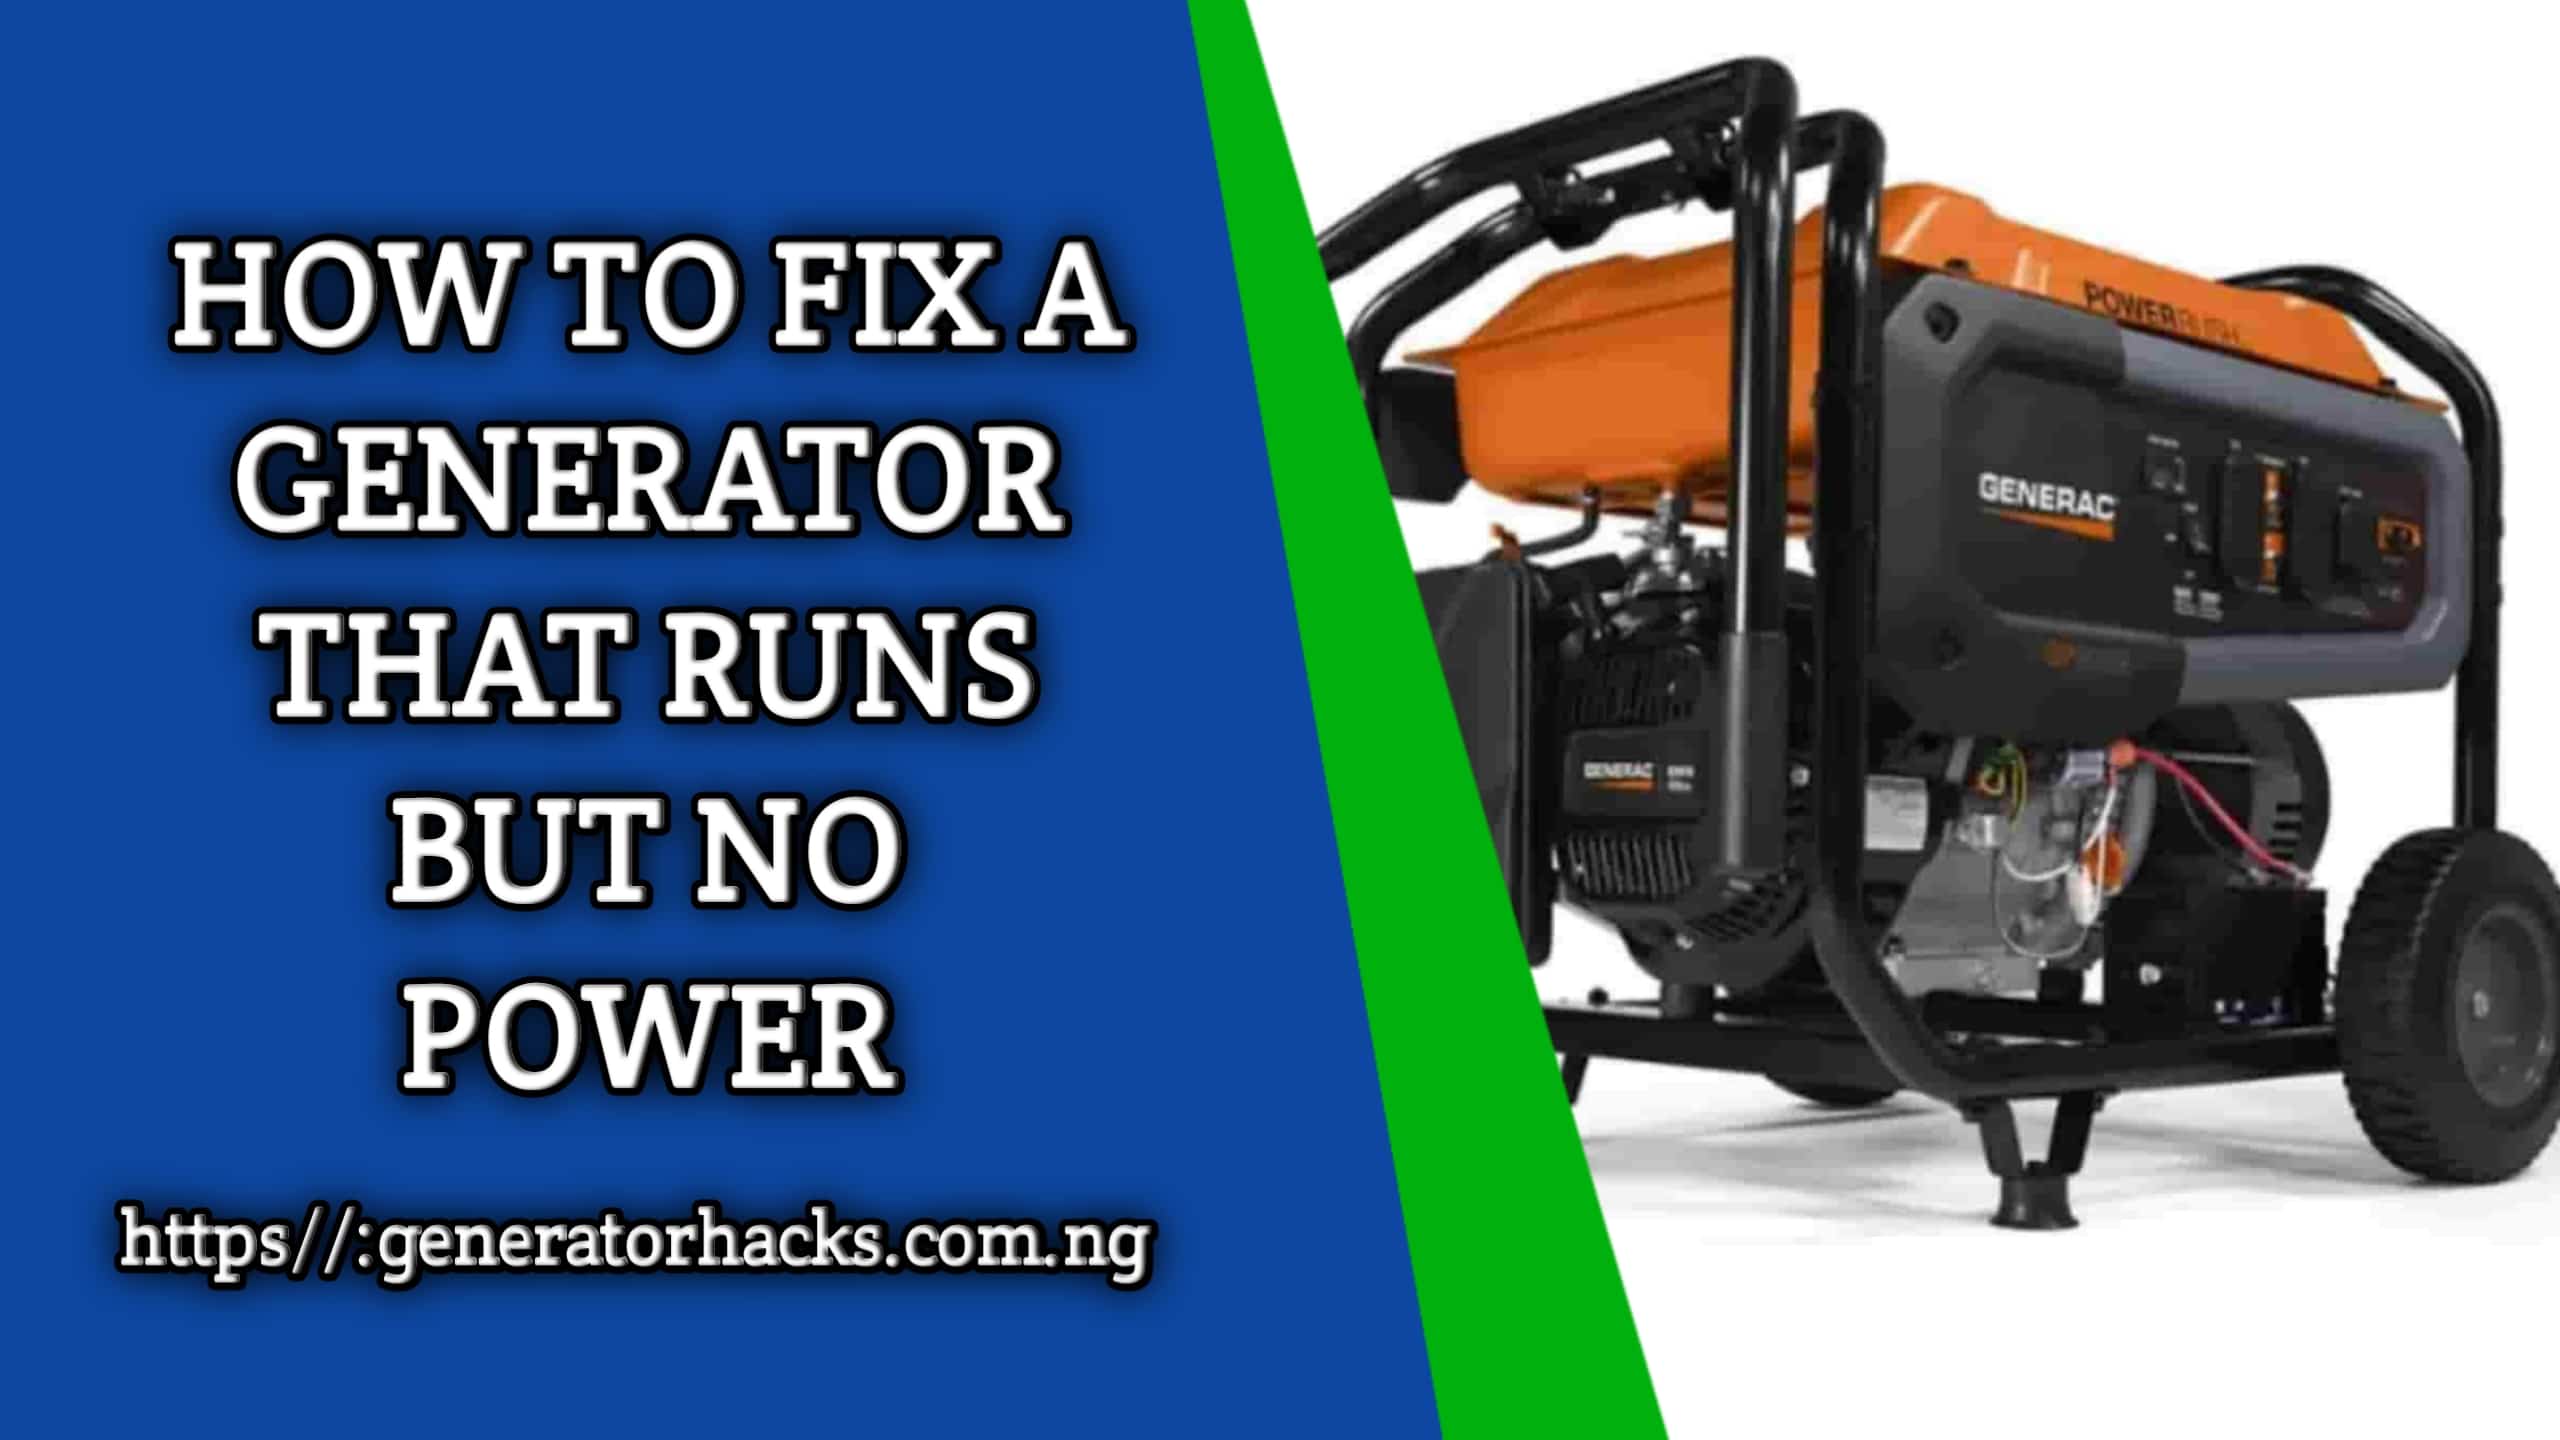 How to Fix a Generator That Runs But No Power